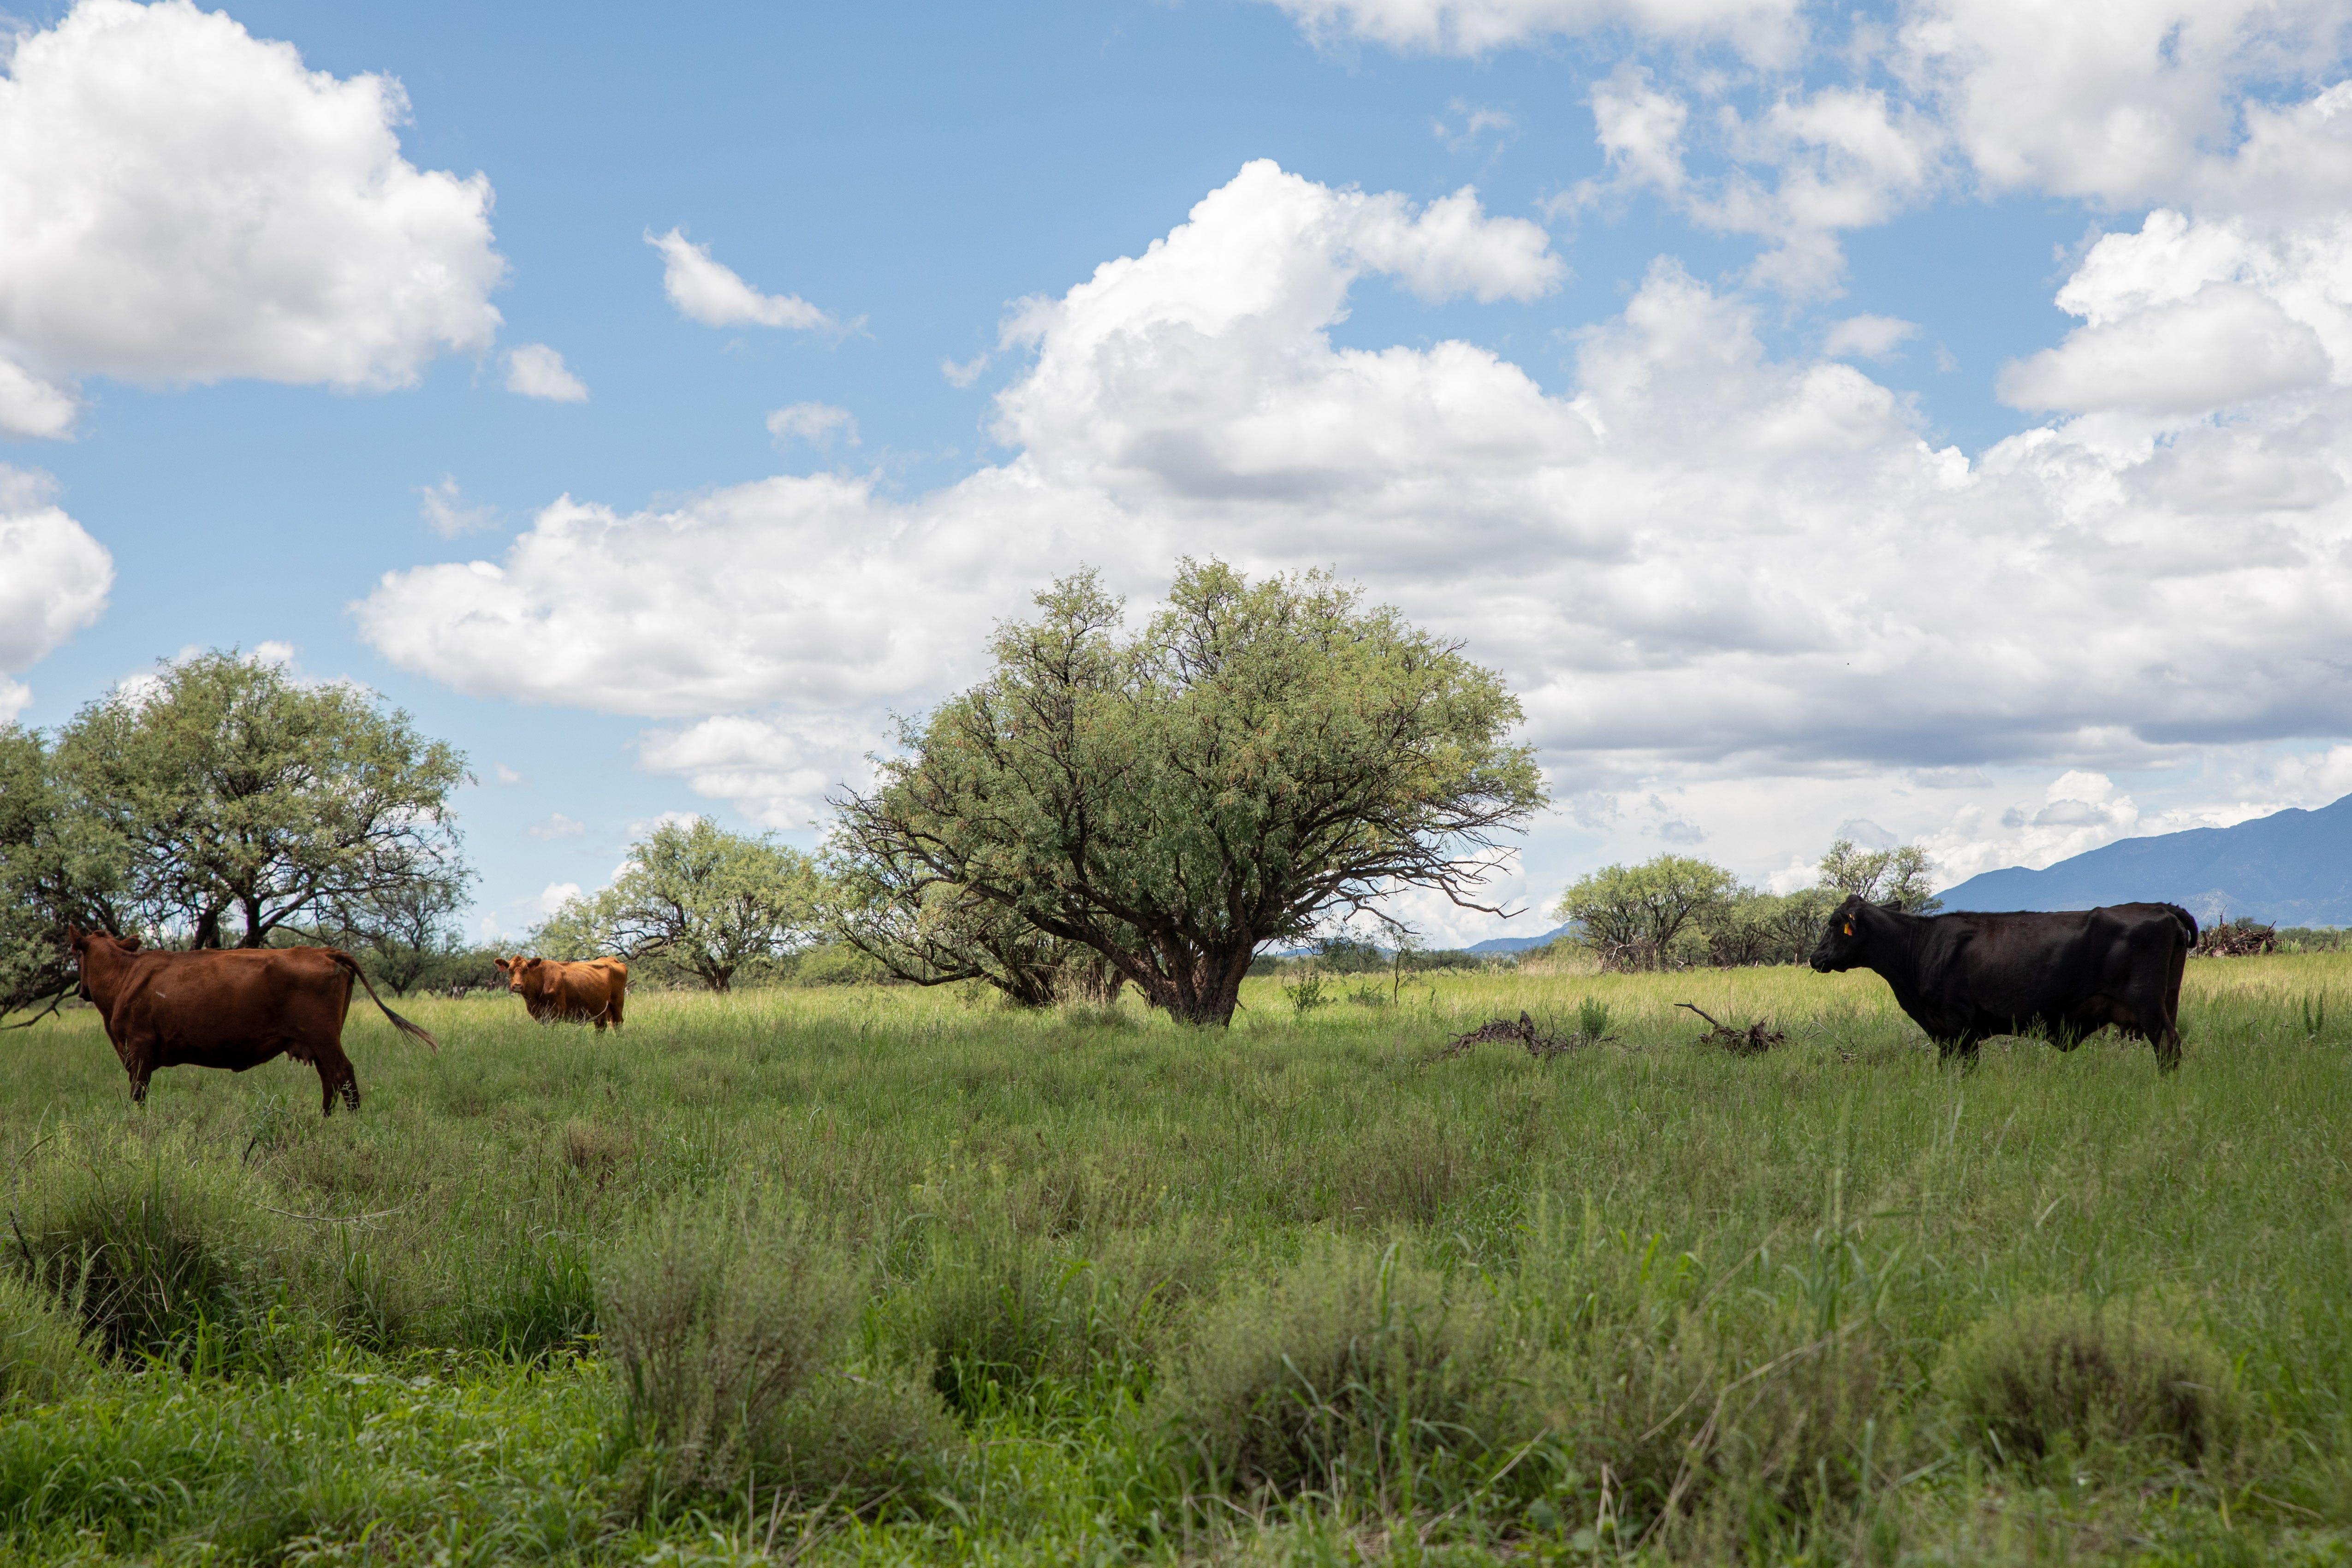 Cattle grazing on public lands renews debate over multiple uses